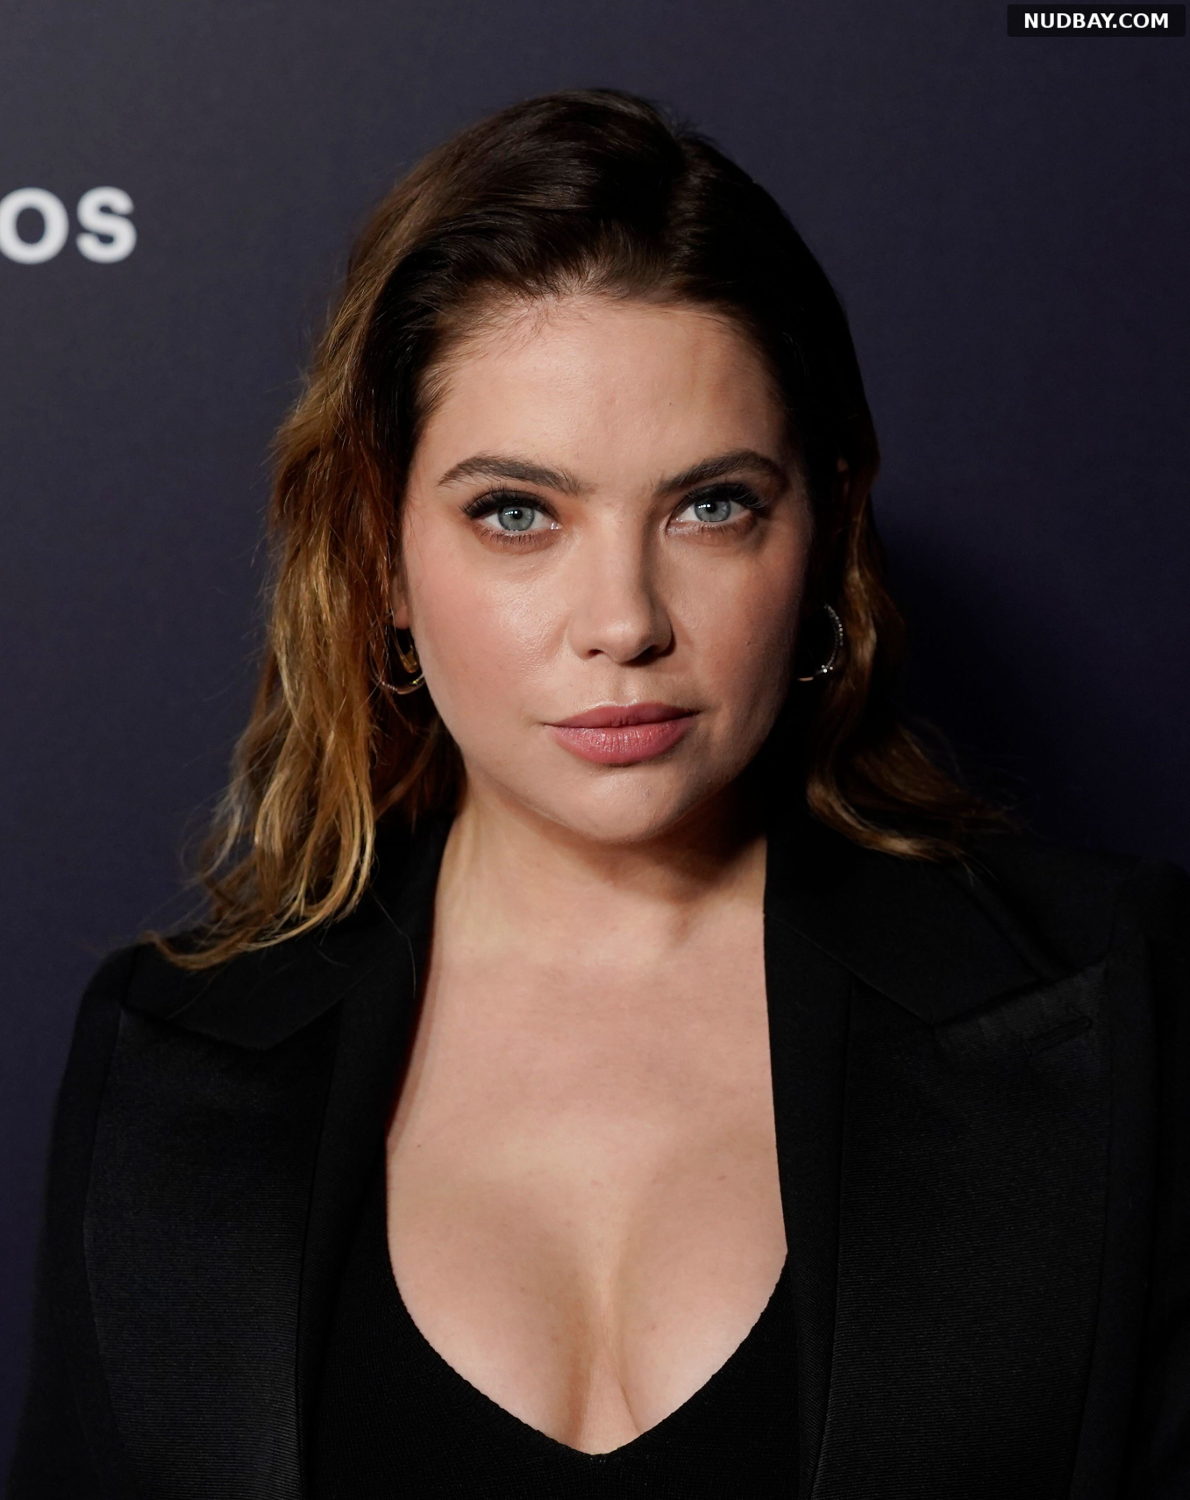 Ashley Benson Tits attending the premiere of Spencer in Los Angeles Oct 26 2021